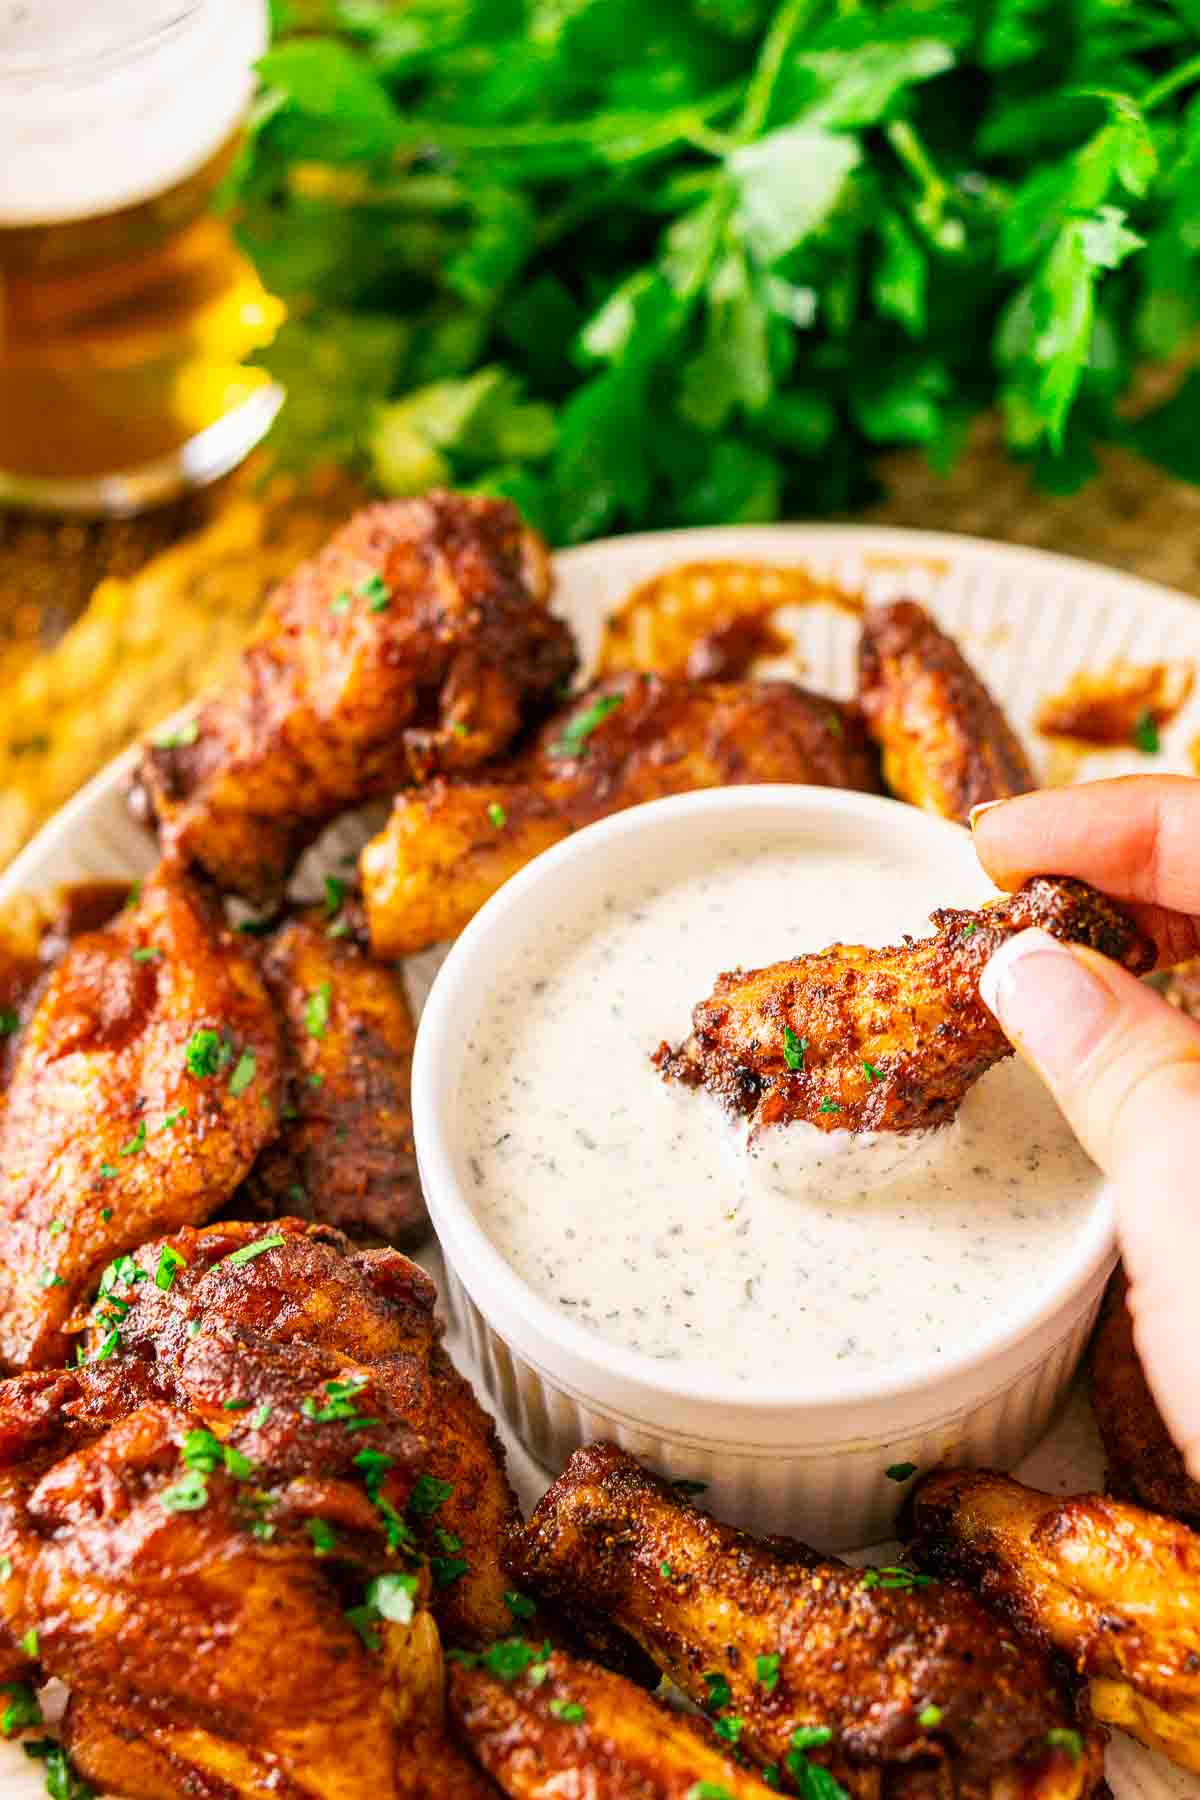 A hand dipping a smoked chicken wing into a small white bowl filled with ranch dressing with a beer in the background.